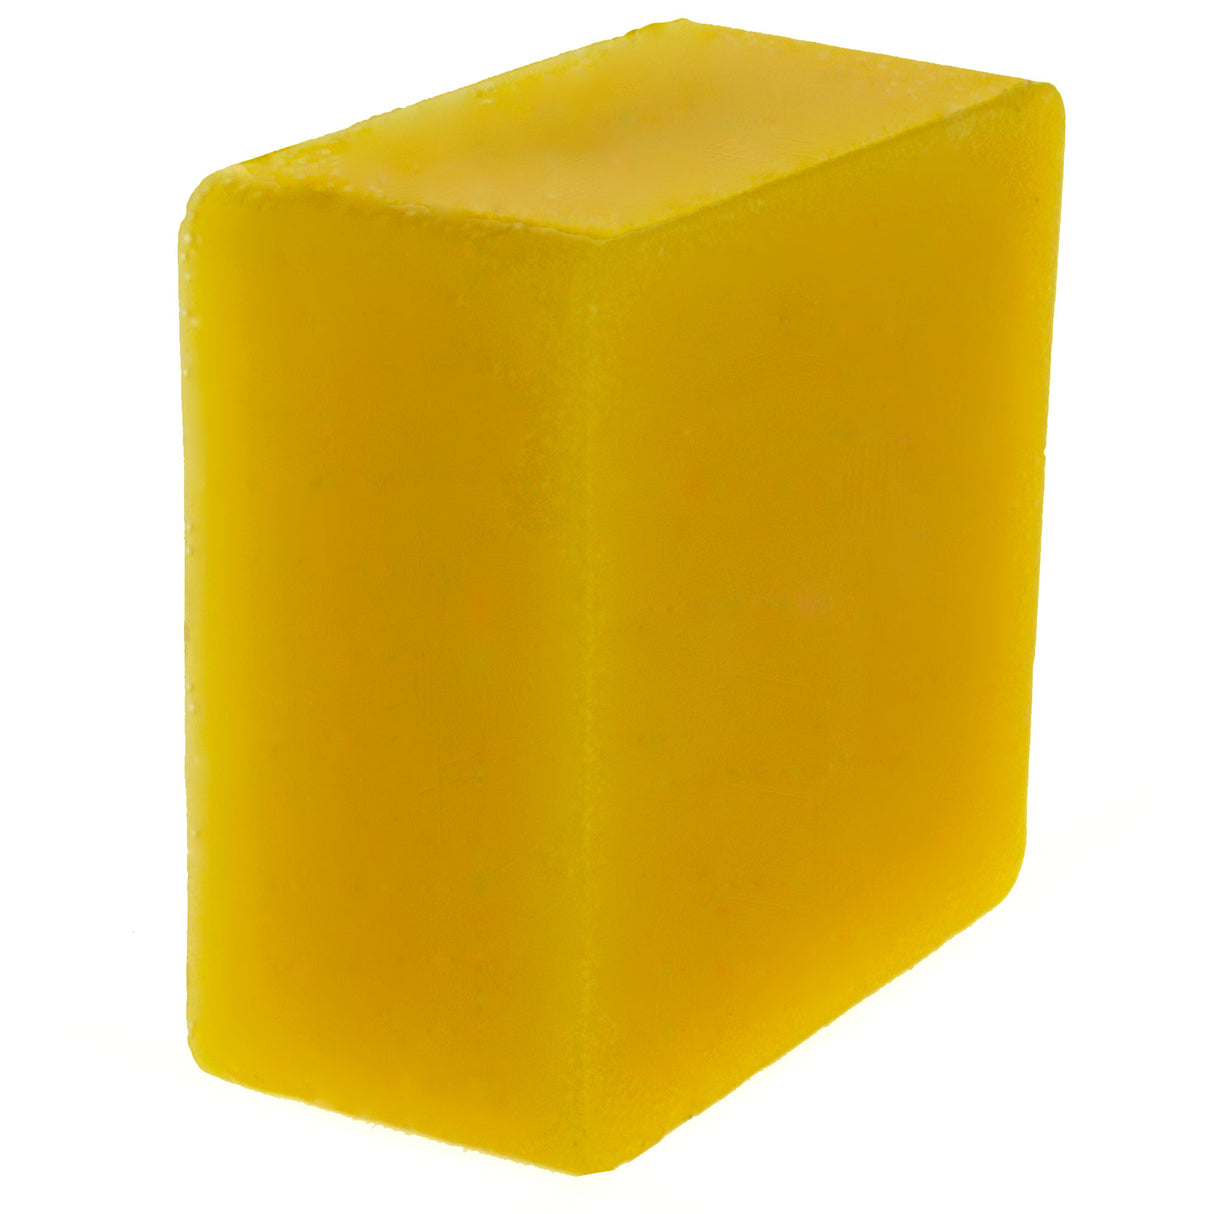 Bees Wax Yellow Triple Filtered Square Beeswax 0.4 oz in Yellow color Square